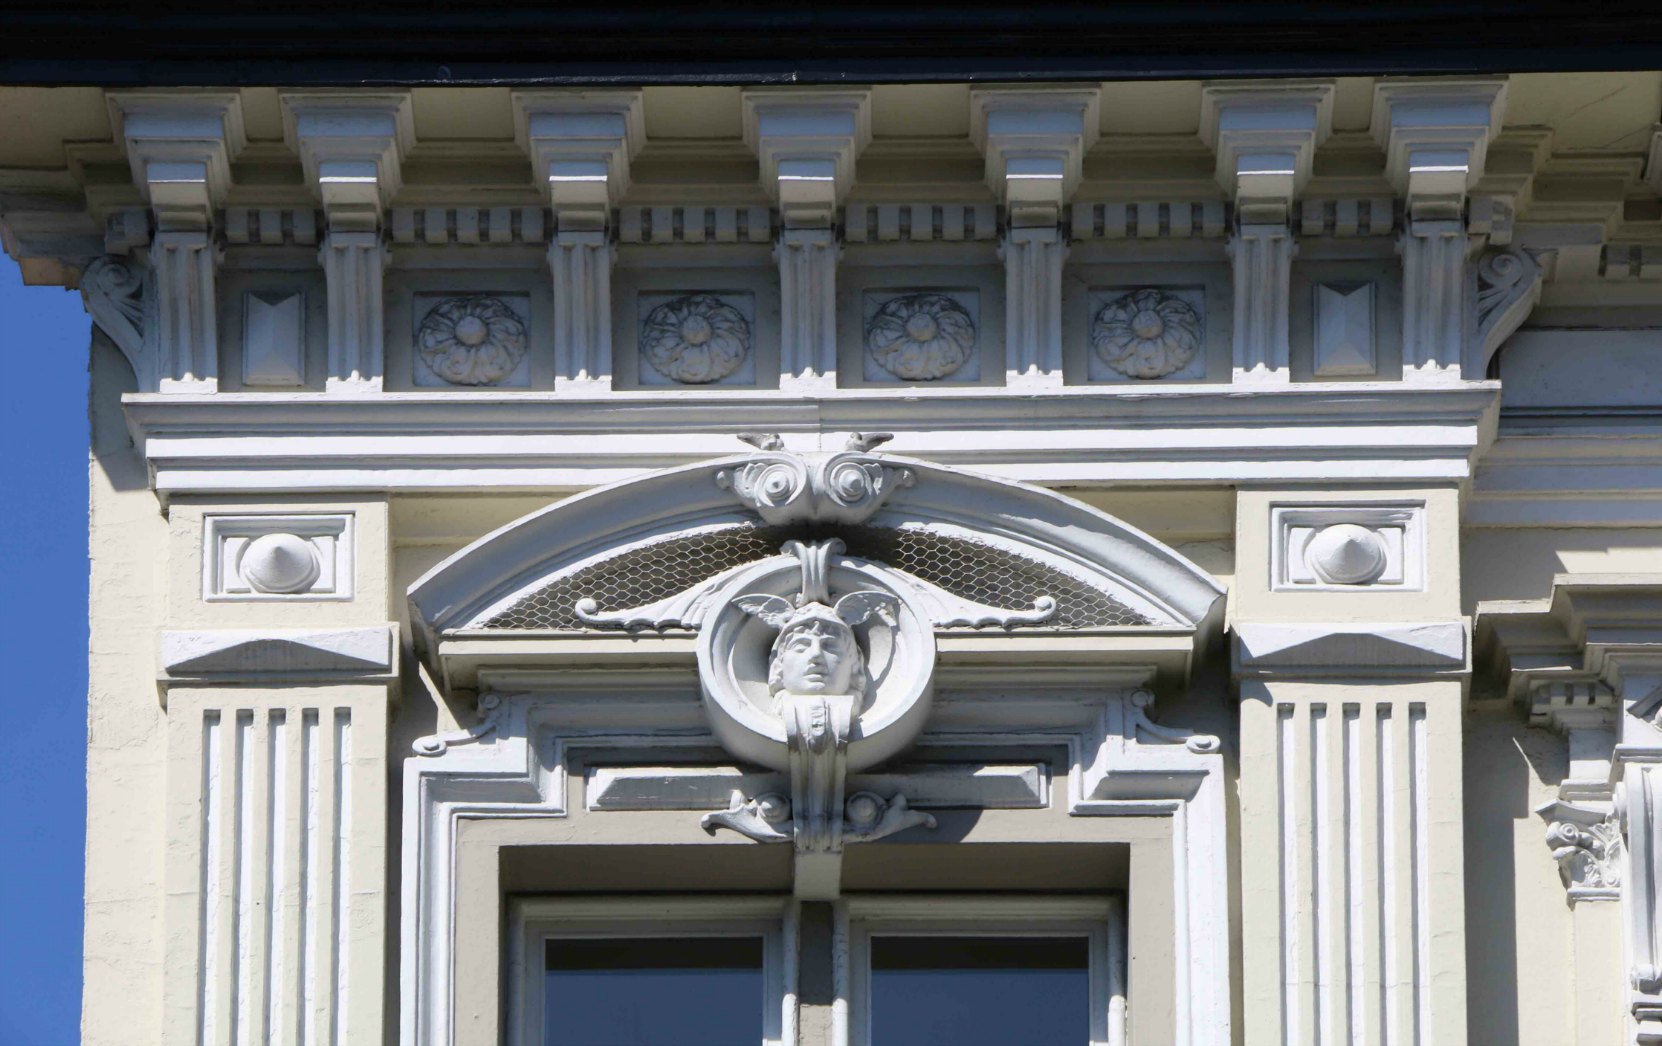 Decorative architectural detail on 1022 Government Street, built in 1885 by architect Warren H. Williams, who also designed Craigdarroch Castle.